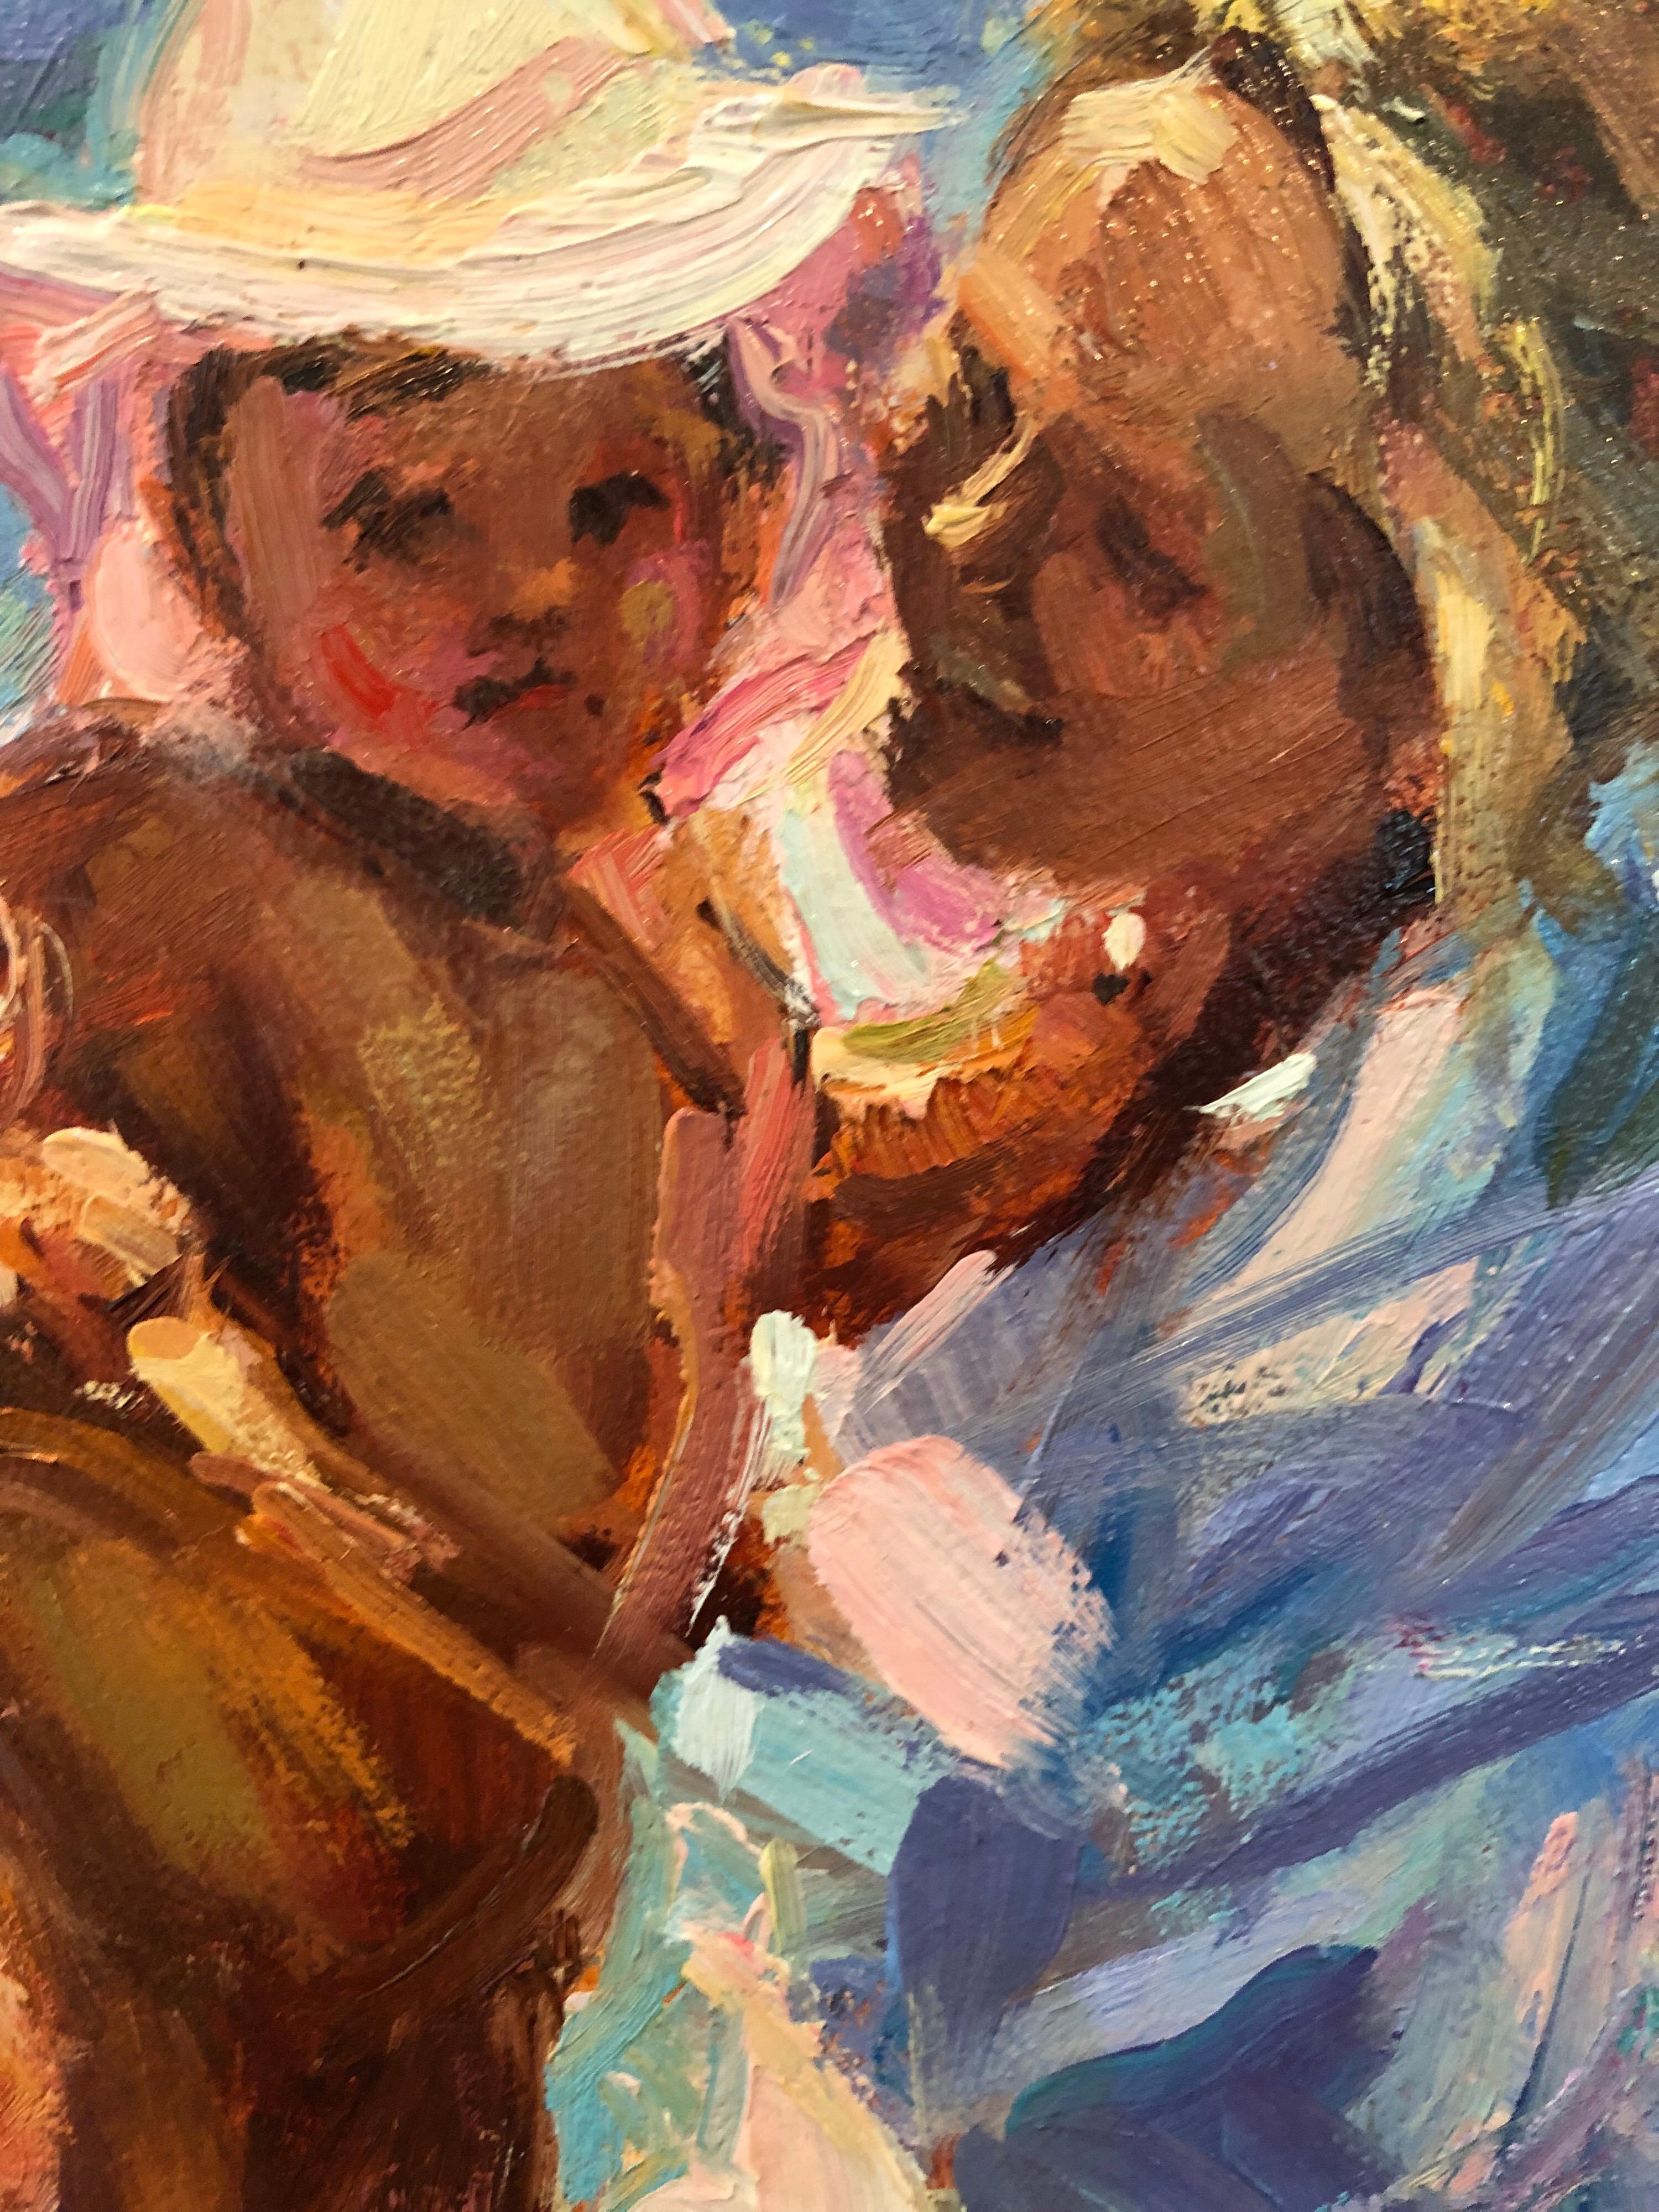 A Part-time resident of Bermuda, Ms. Cedrone has ample time to study the effects of sun and wind on the ocean. Her command of both brush and palette are displayed in this sweet piece where we glimpse the private world of a mother playing with her